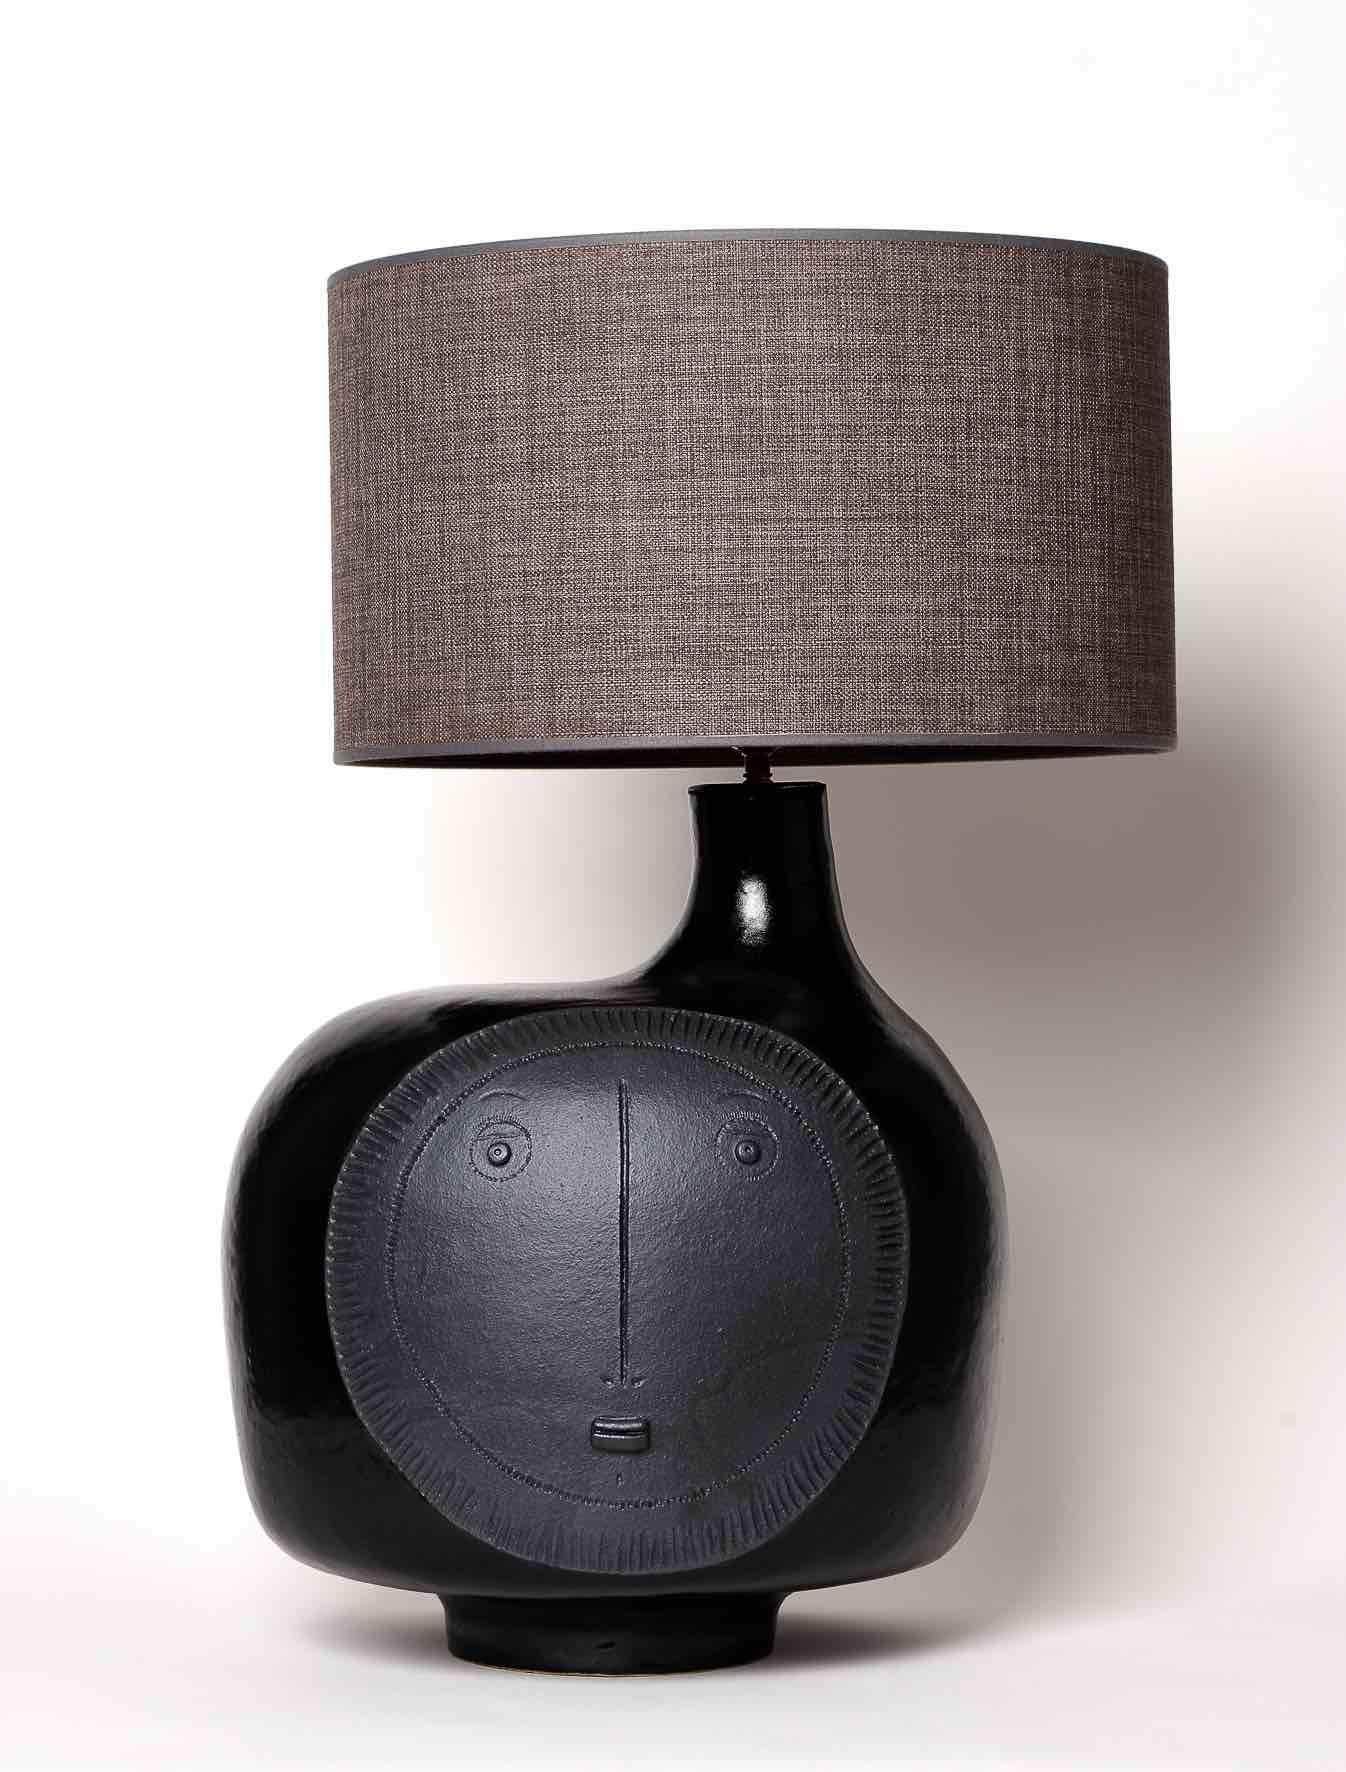 Handmade biomorphic sculpture forming lamp-base, stoneware glazed in deep shiny black and decorated with a stylized mat medallion visage.

One of a kind piece signed by the French ceramicists Dalo.

The height dimensions are for the pottery